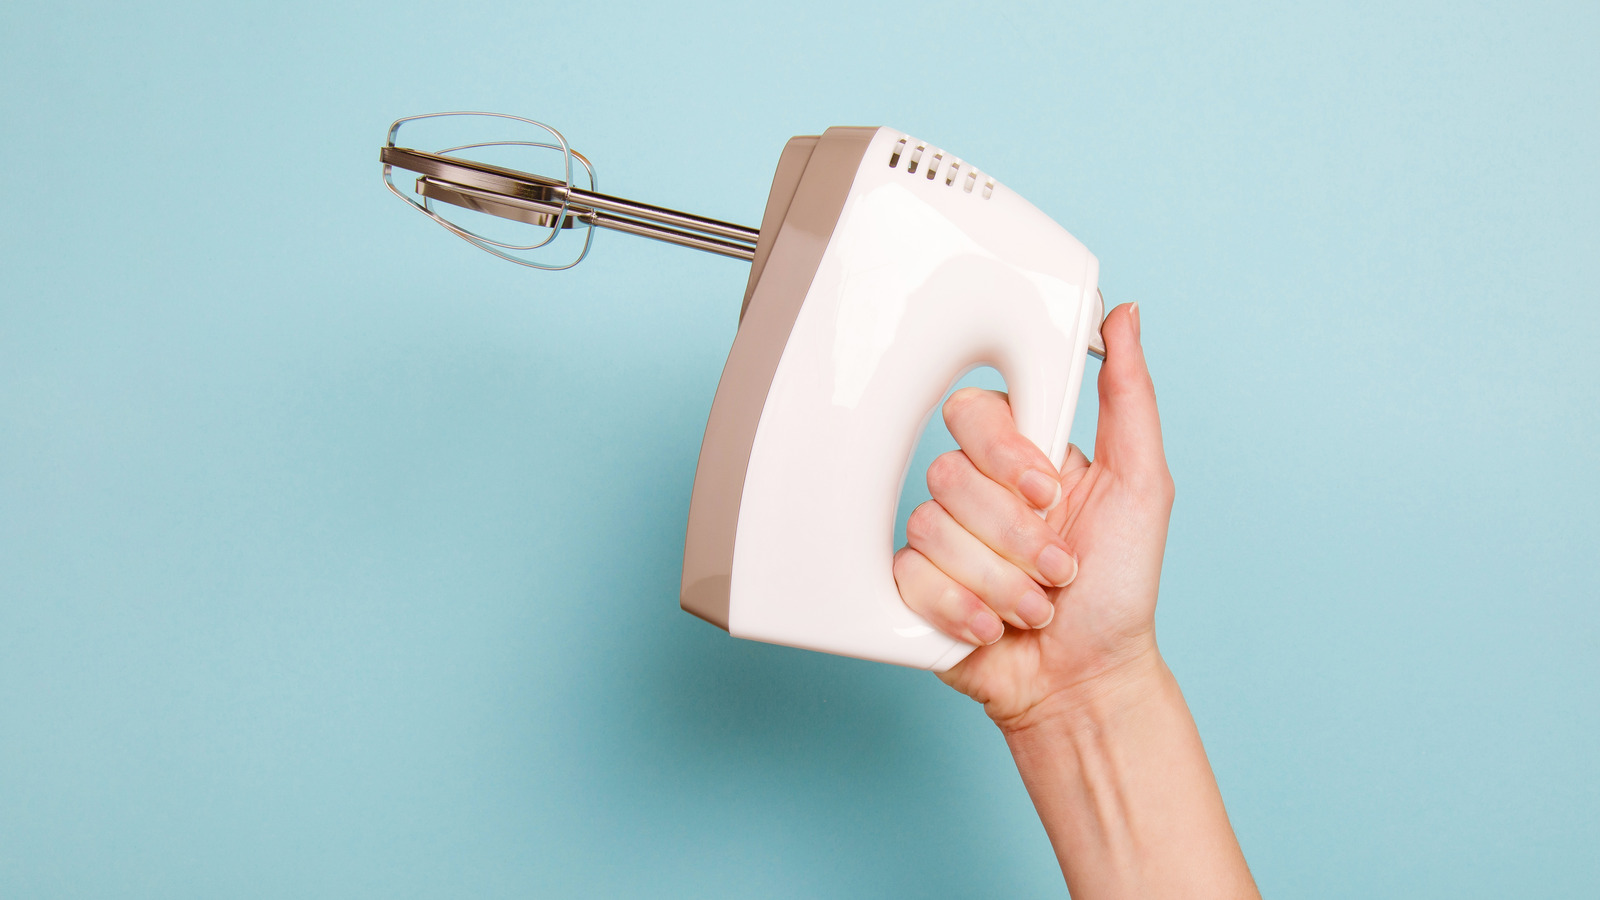 https://www.tastingtable.com/img/gallery/the-absolute-best-uses-for-your-electric-hand-mixer/l-intro-1649095875.jpg